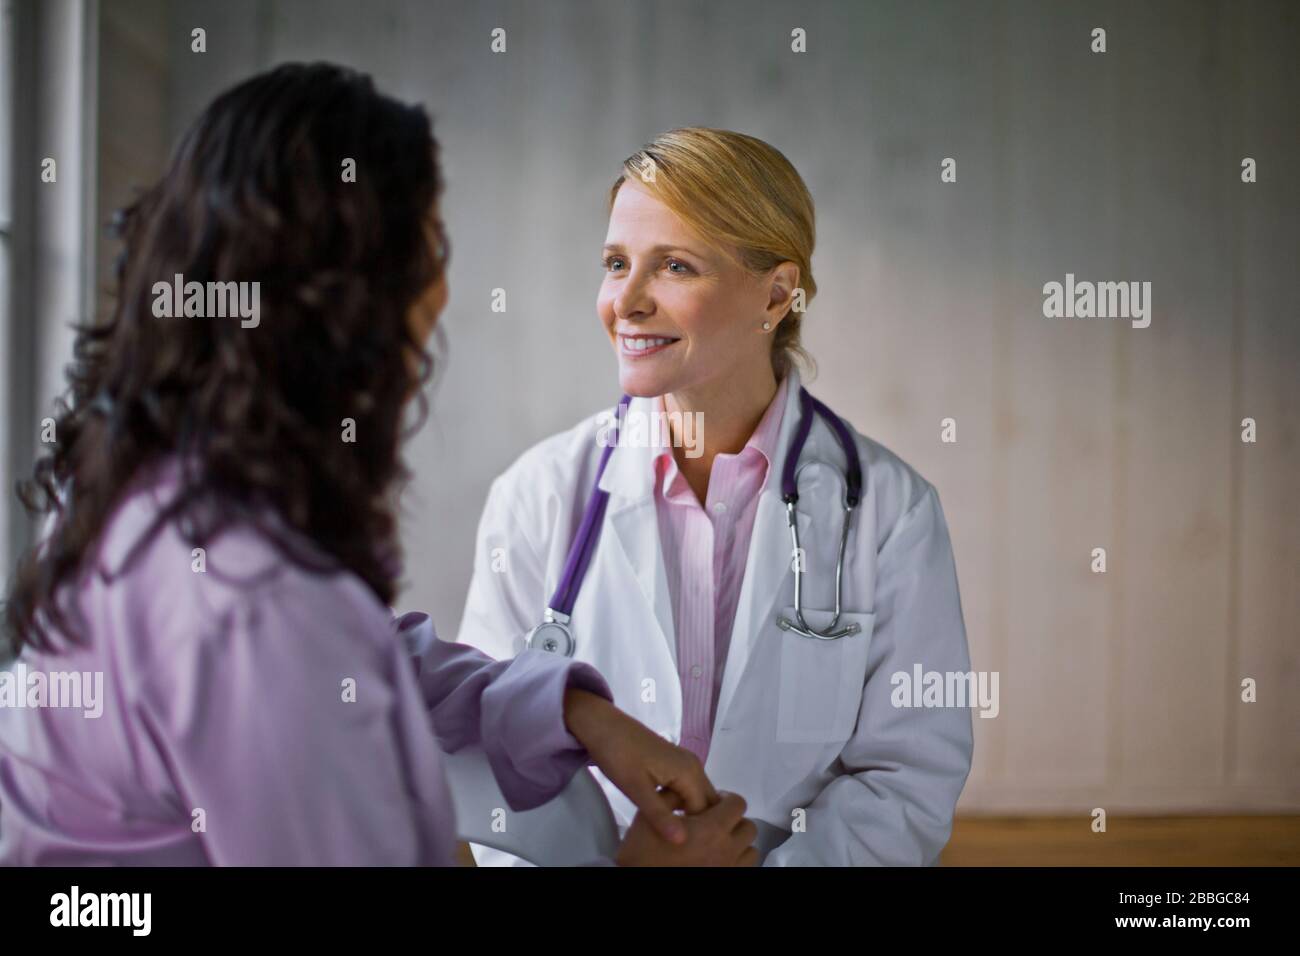 Mid adult female doctor talking with a patient Stock Photo